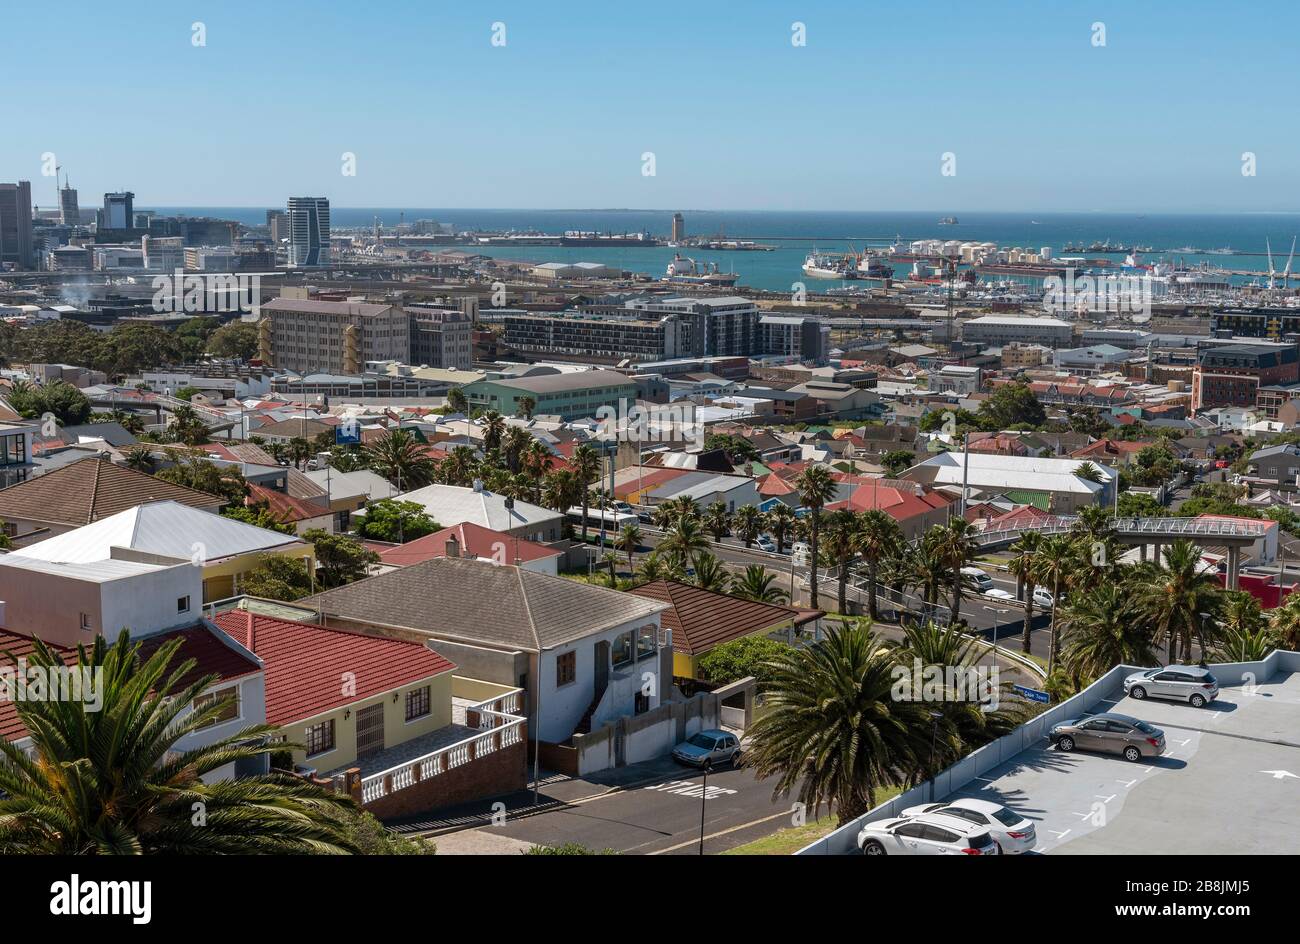 Cape Town, South Africa. Dec 2019. Housing and industrial development in the suburbs of Cape Town, South Africa Stock Photo